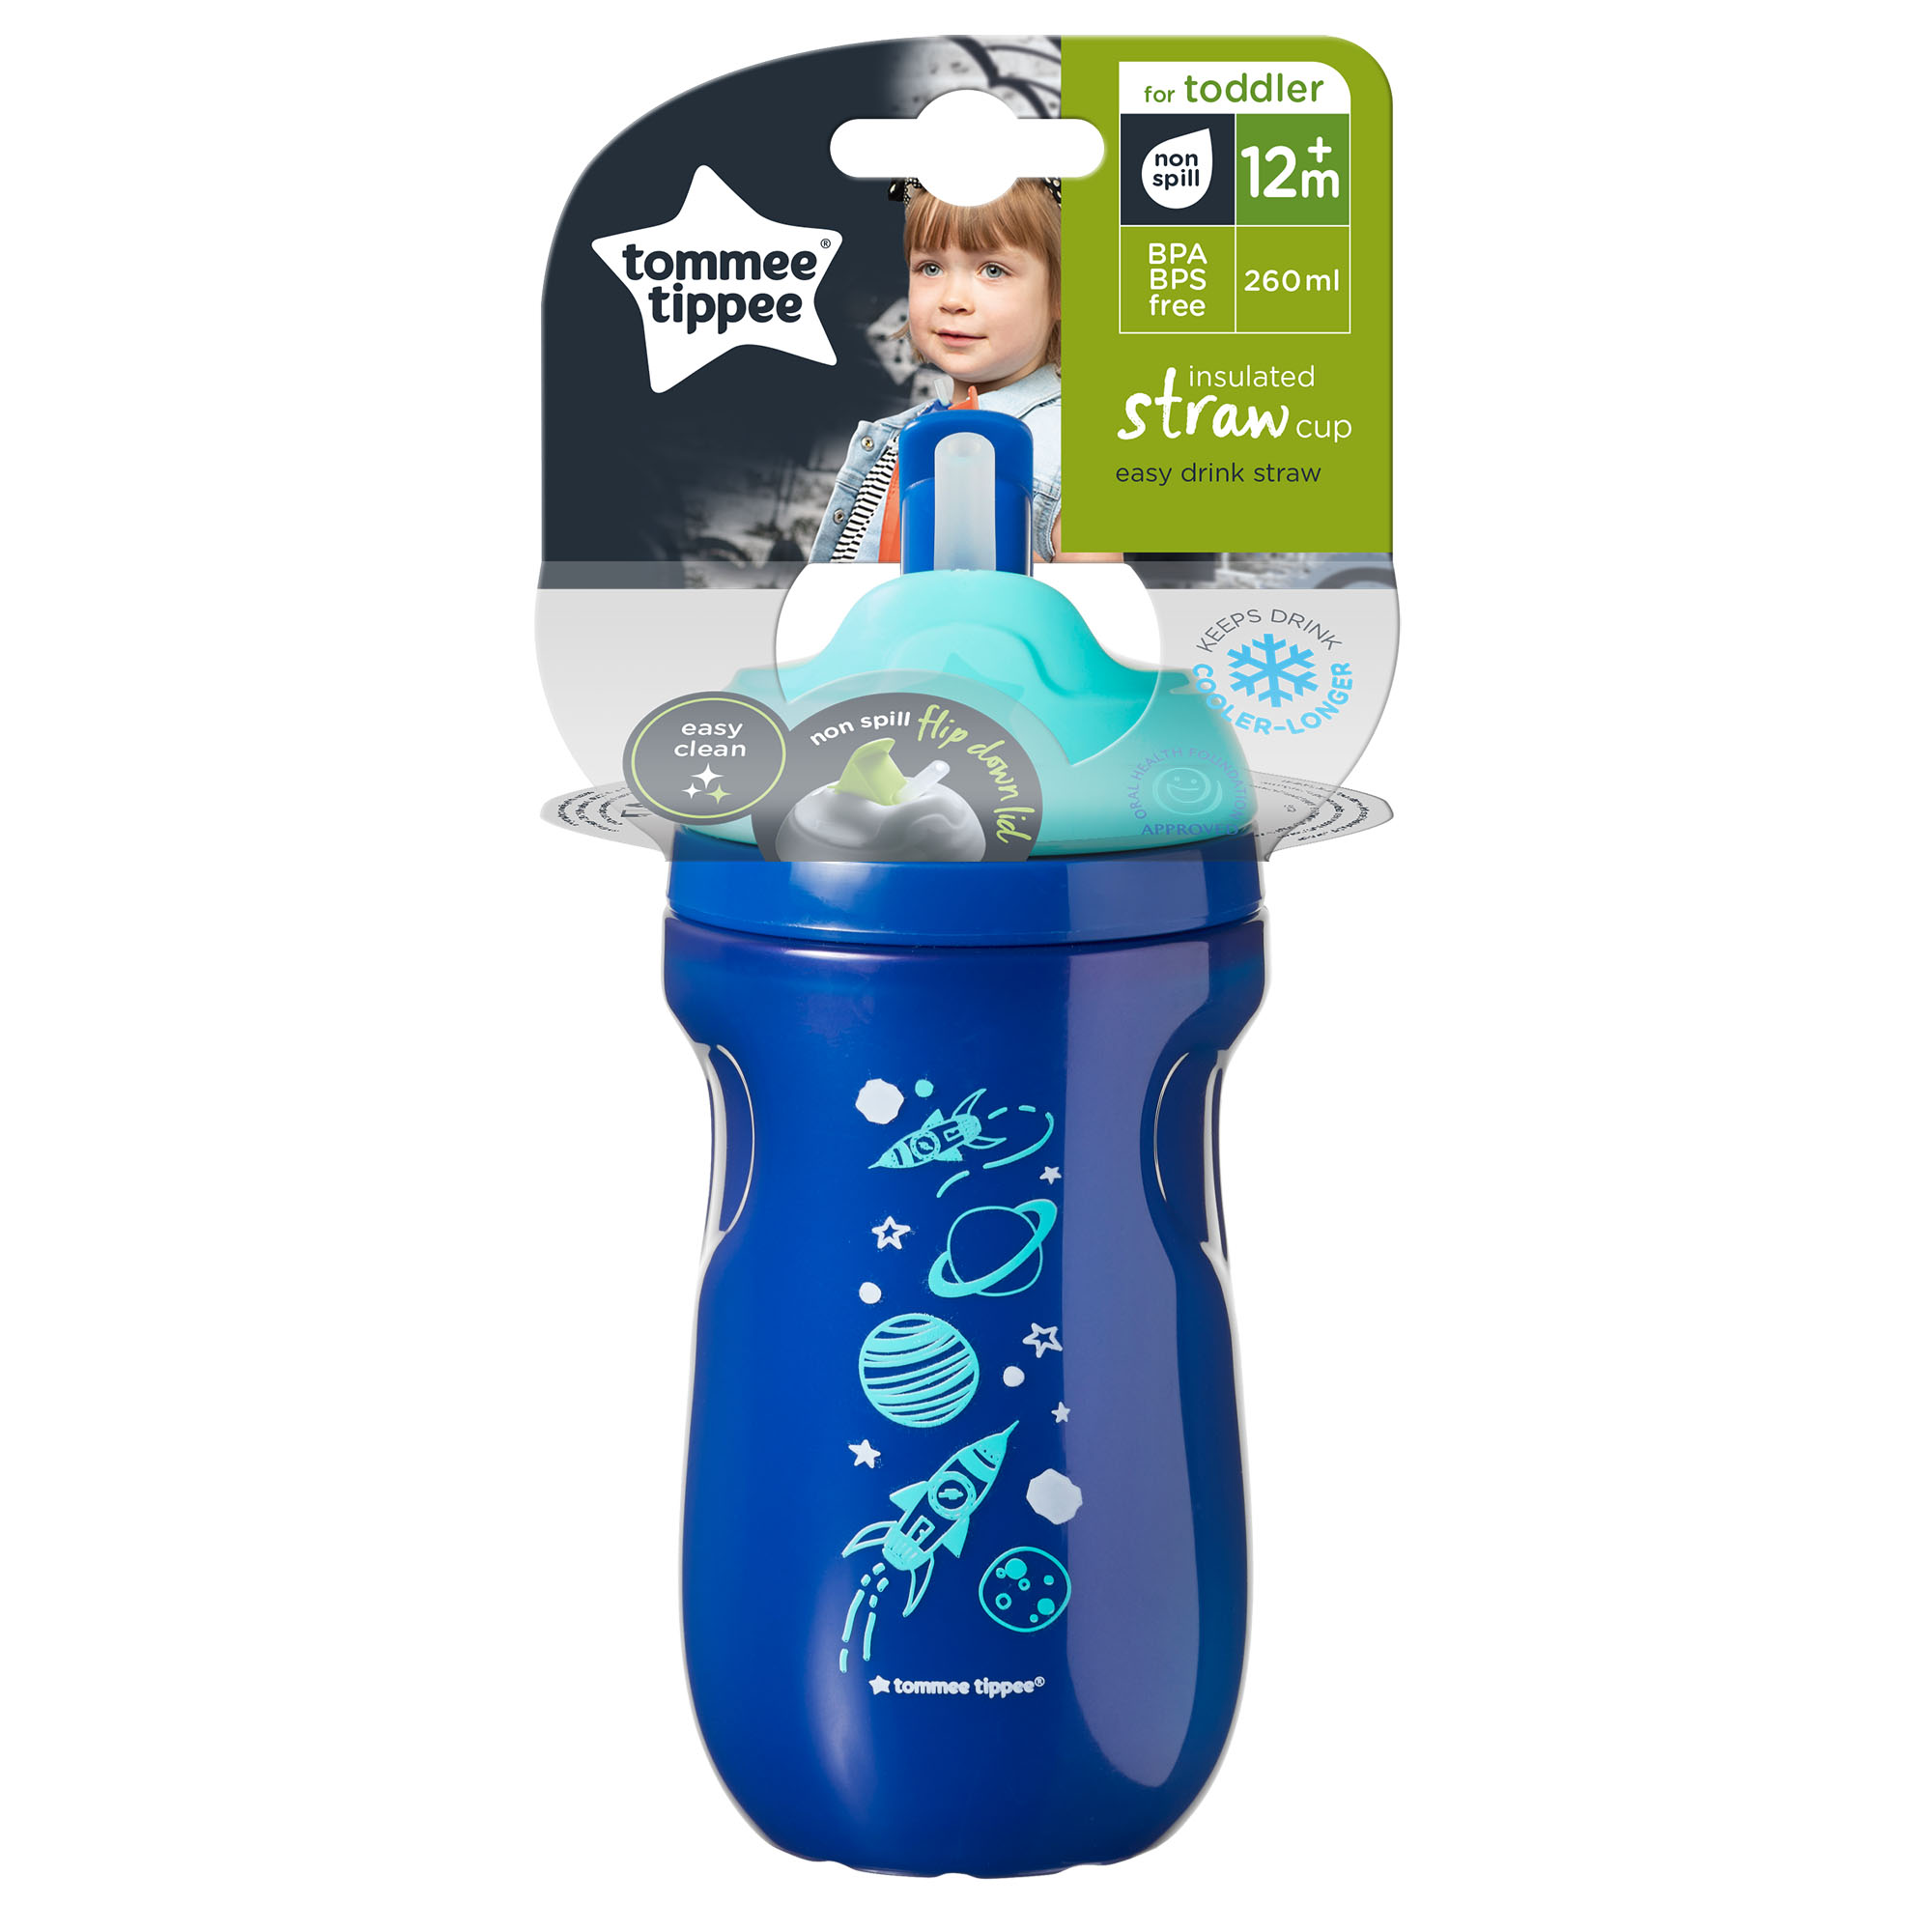 Tommee Tippee Active Straw Cup Bpa Free Age 12m+ Dream Big 